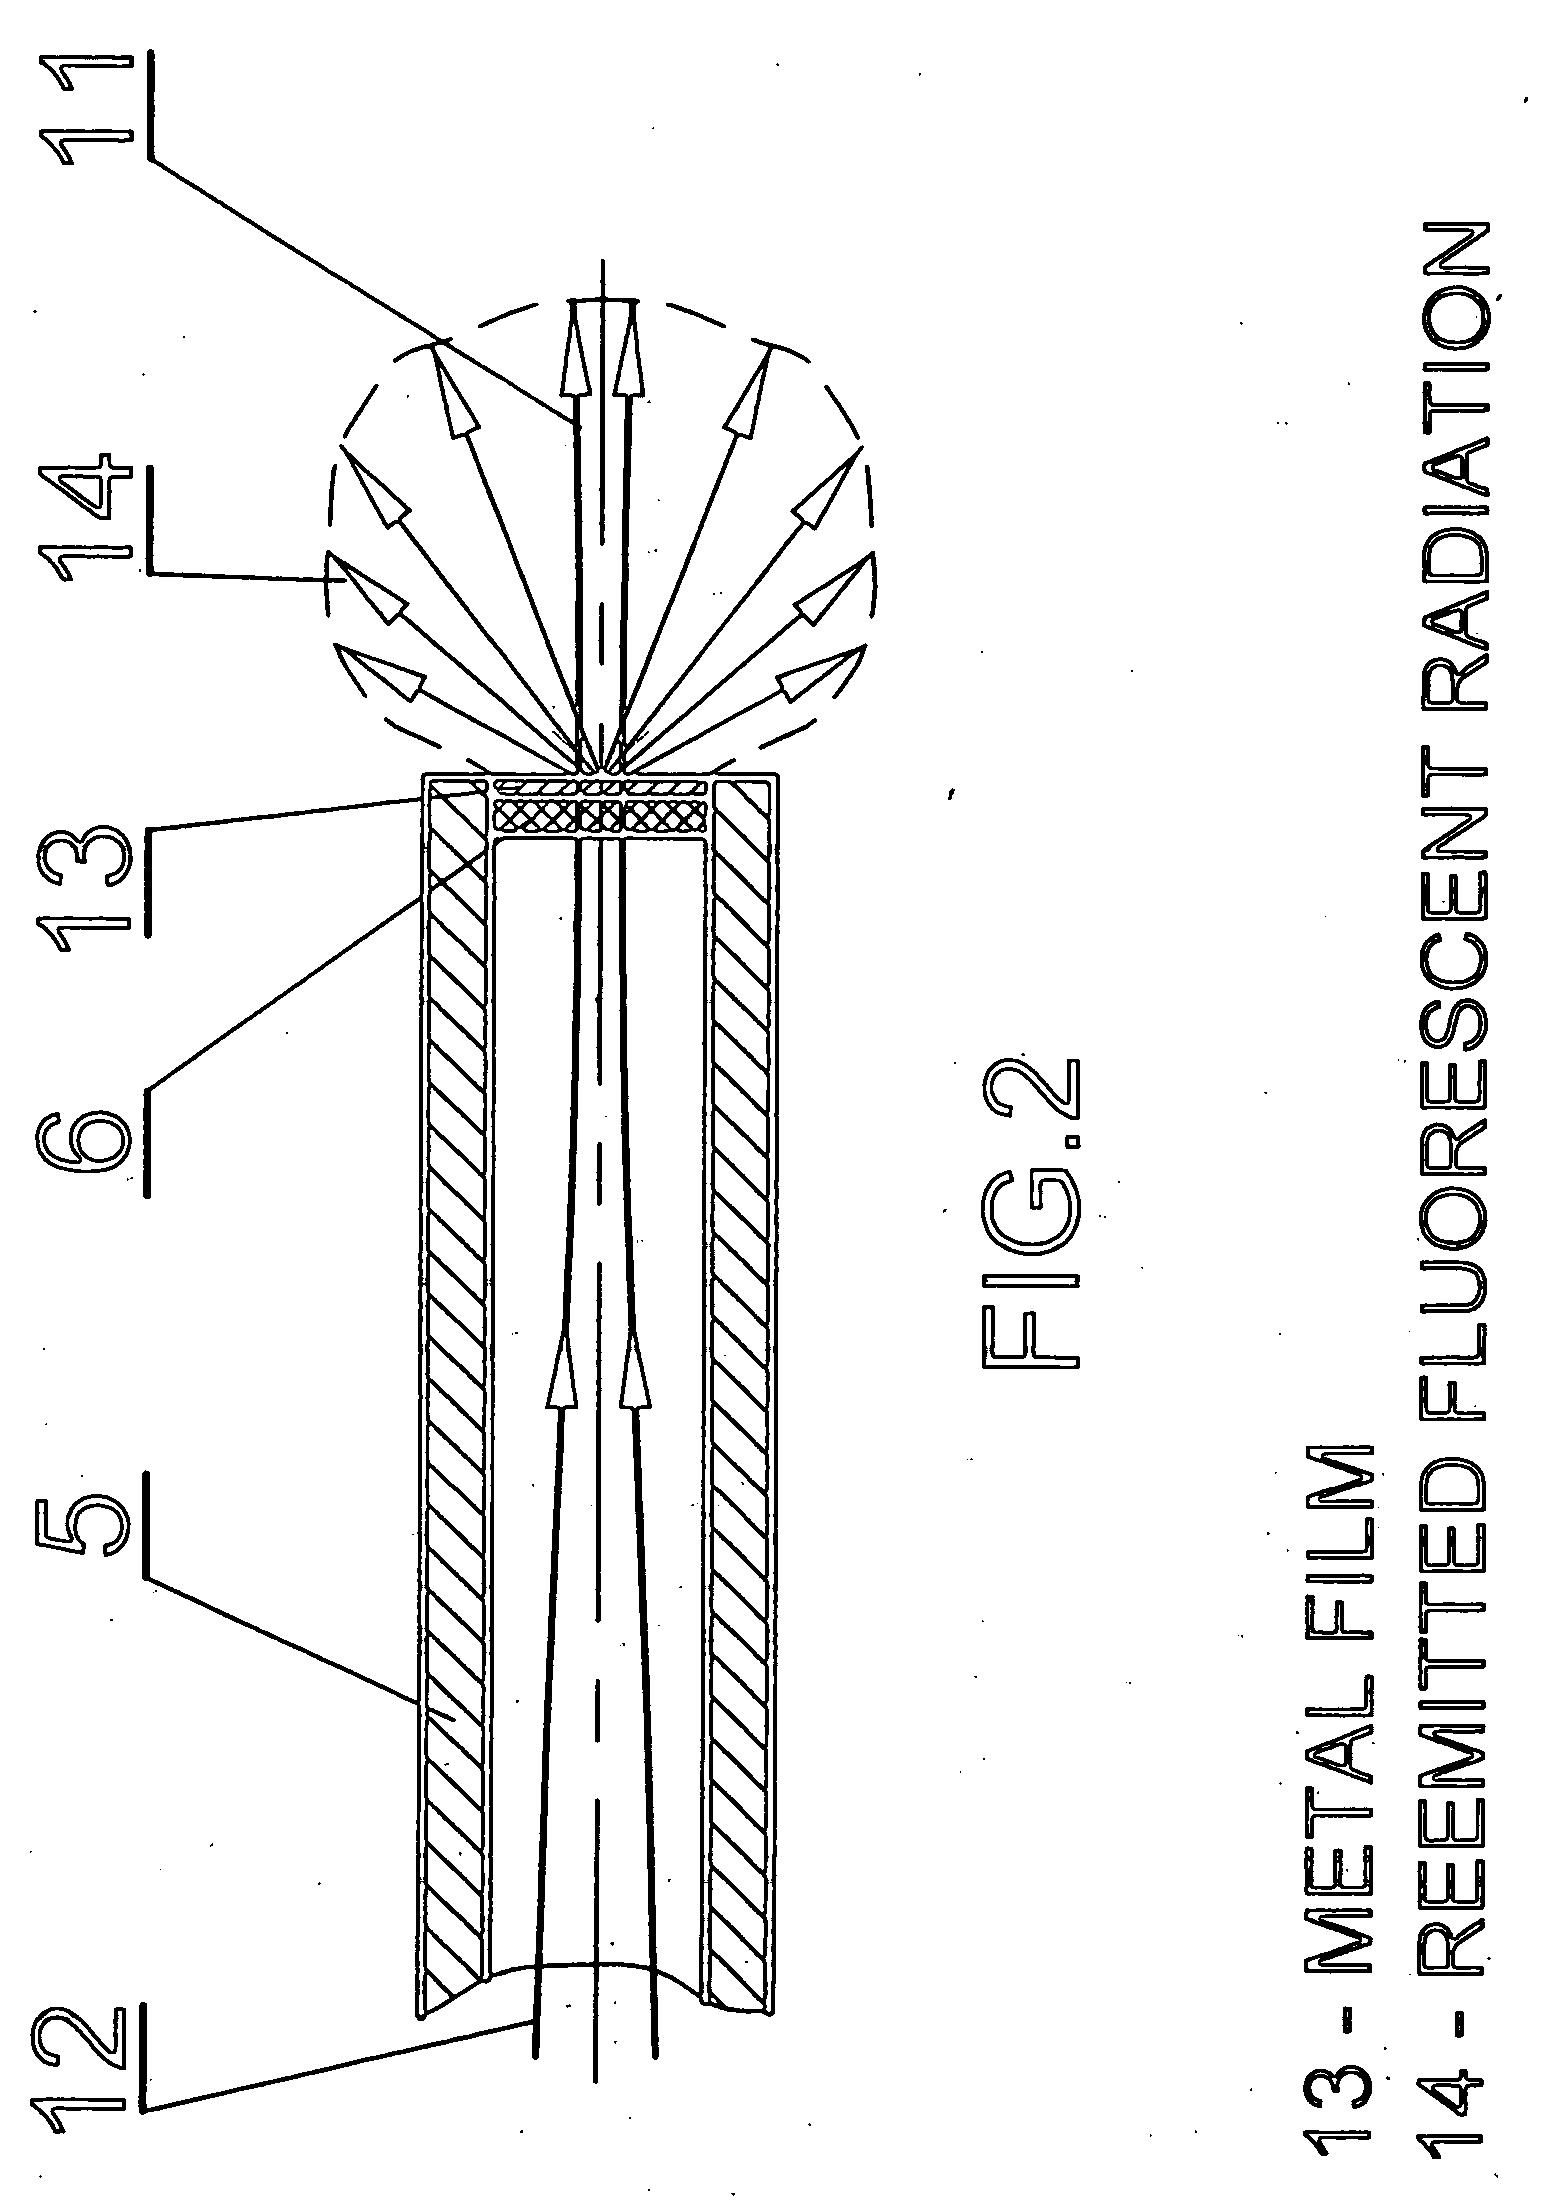 X-ray needle apparatus and method for radiation treatment